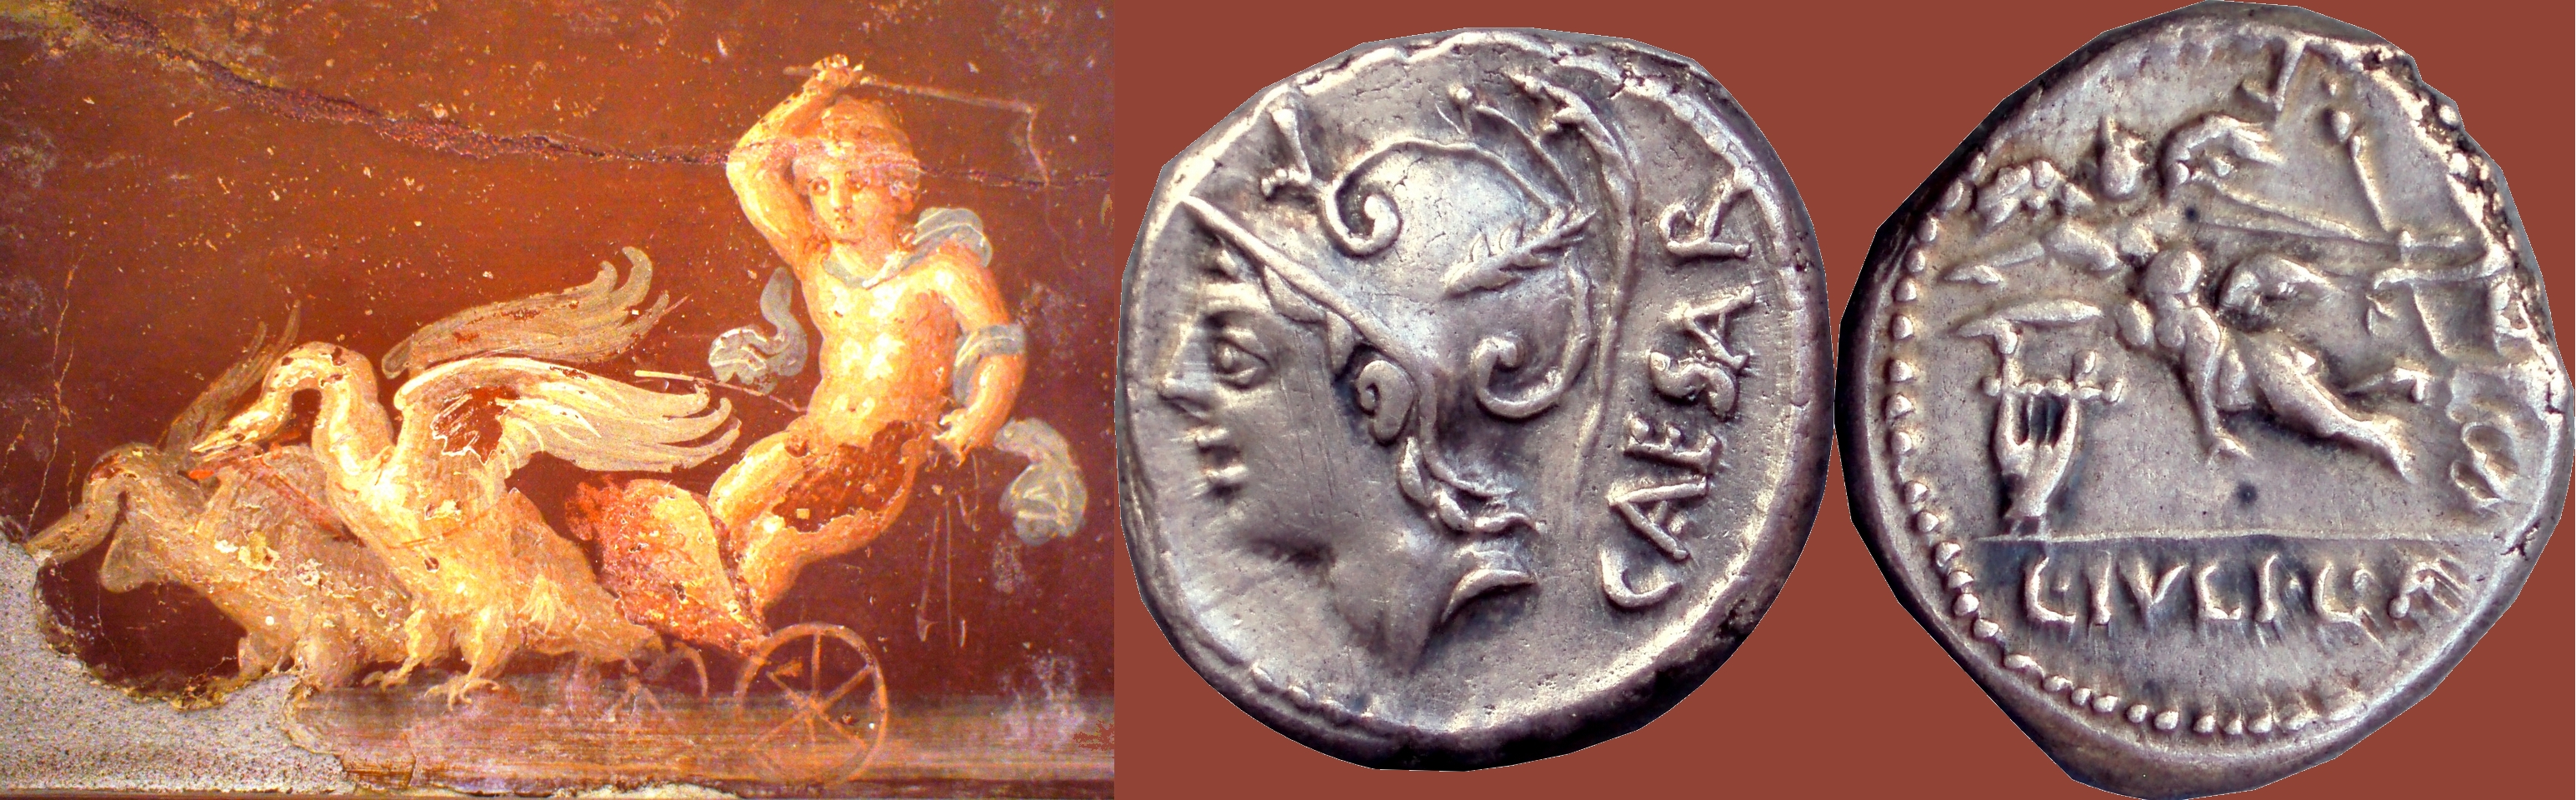 320/1 coin with Venus and a Biga of Cupids, 103BC, with miniature painting of Cupid and a Biga of Swans from Pompeii